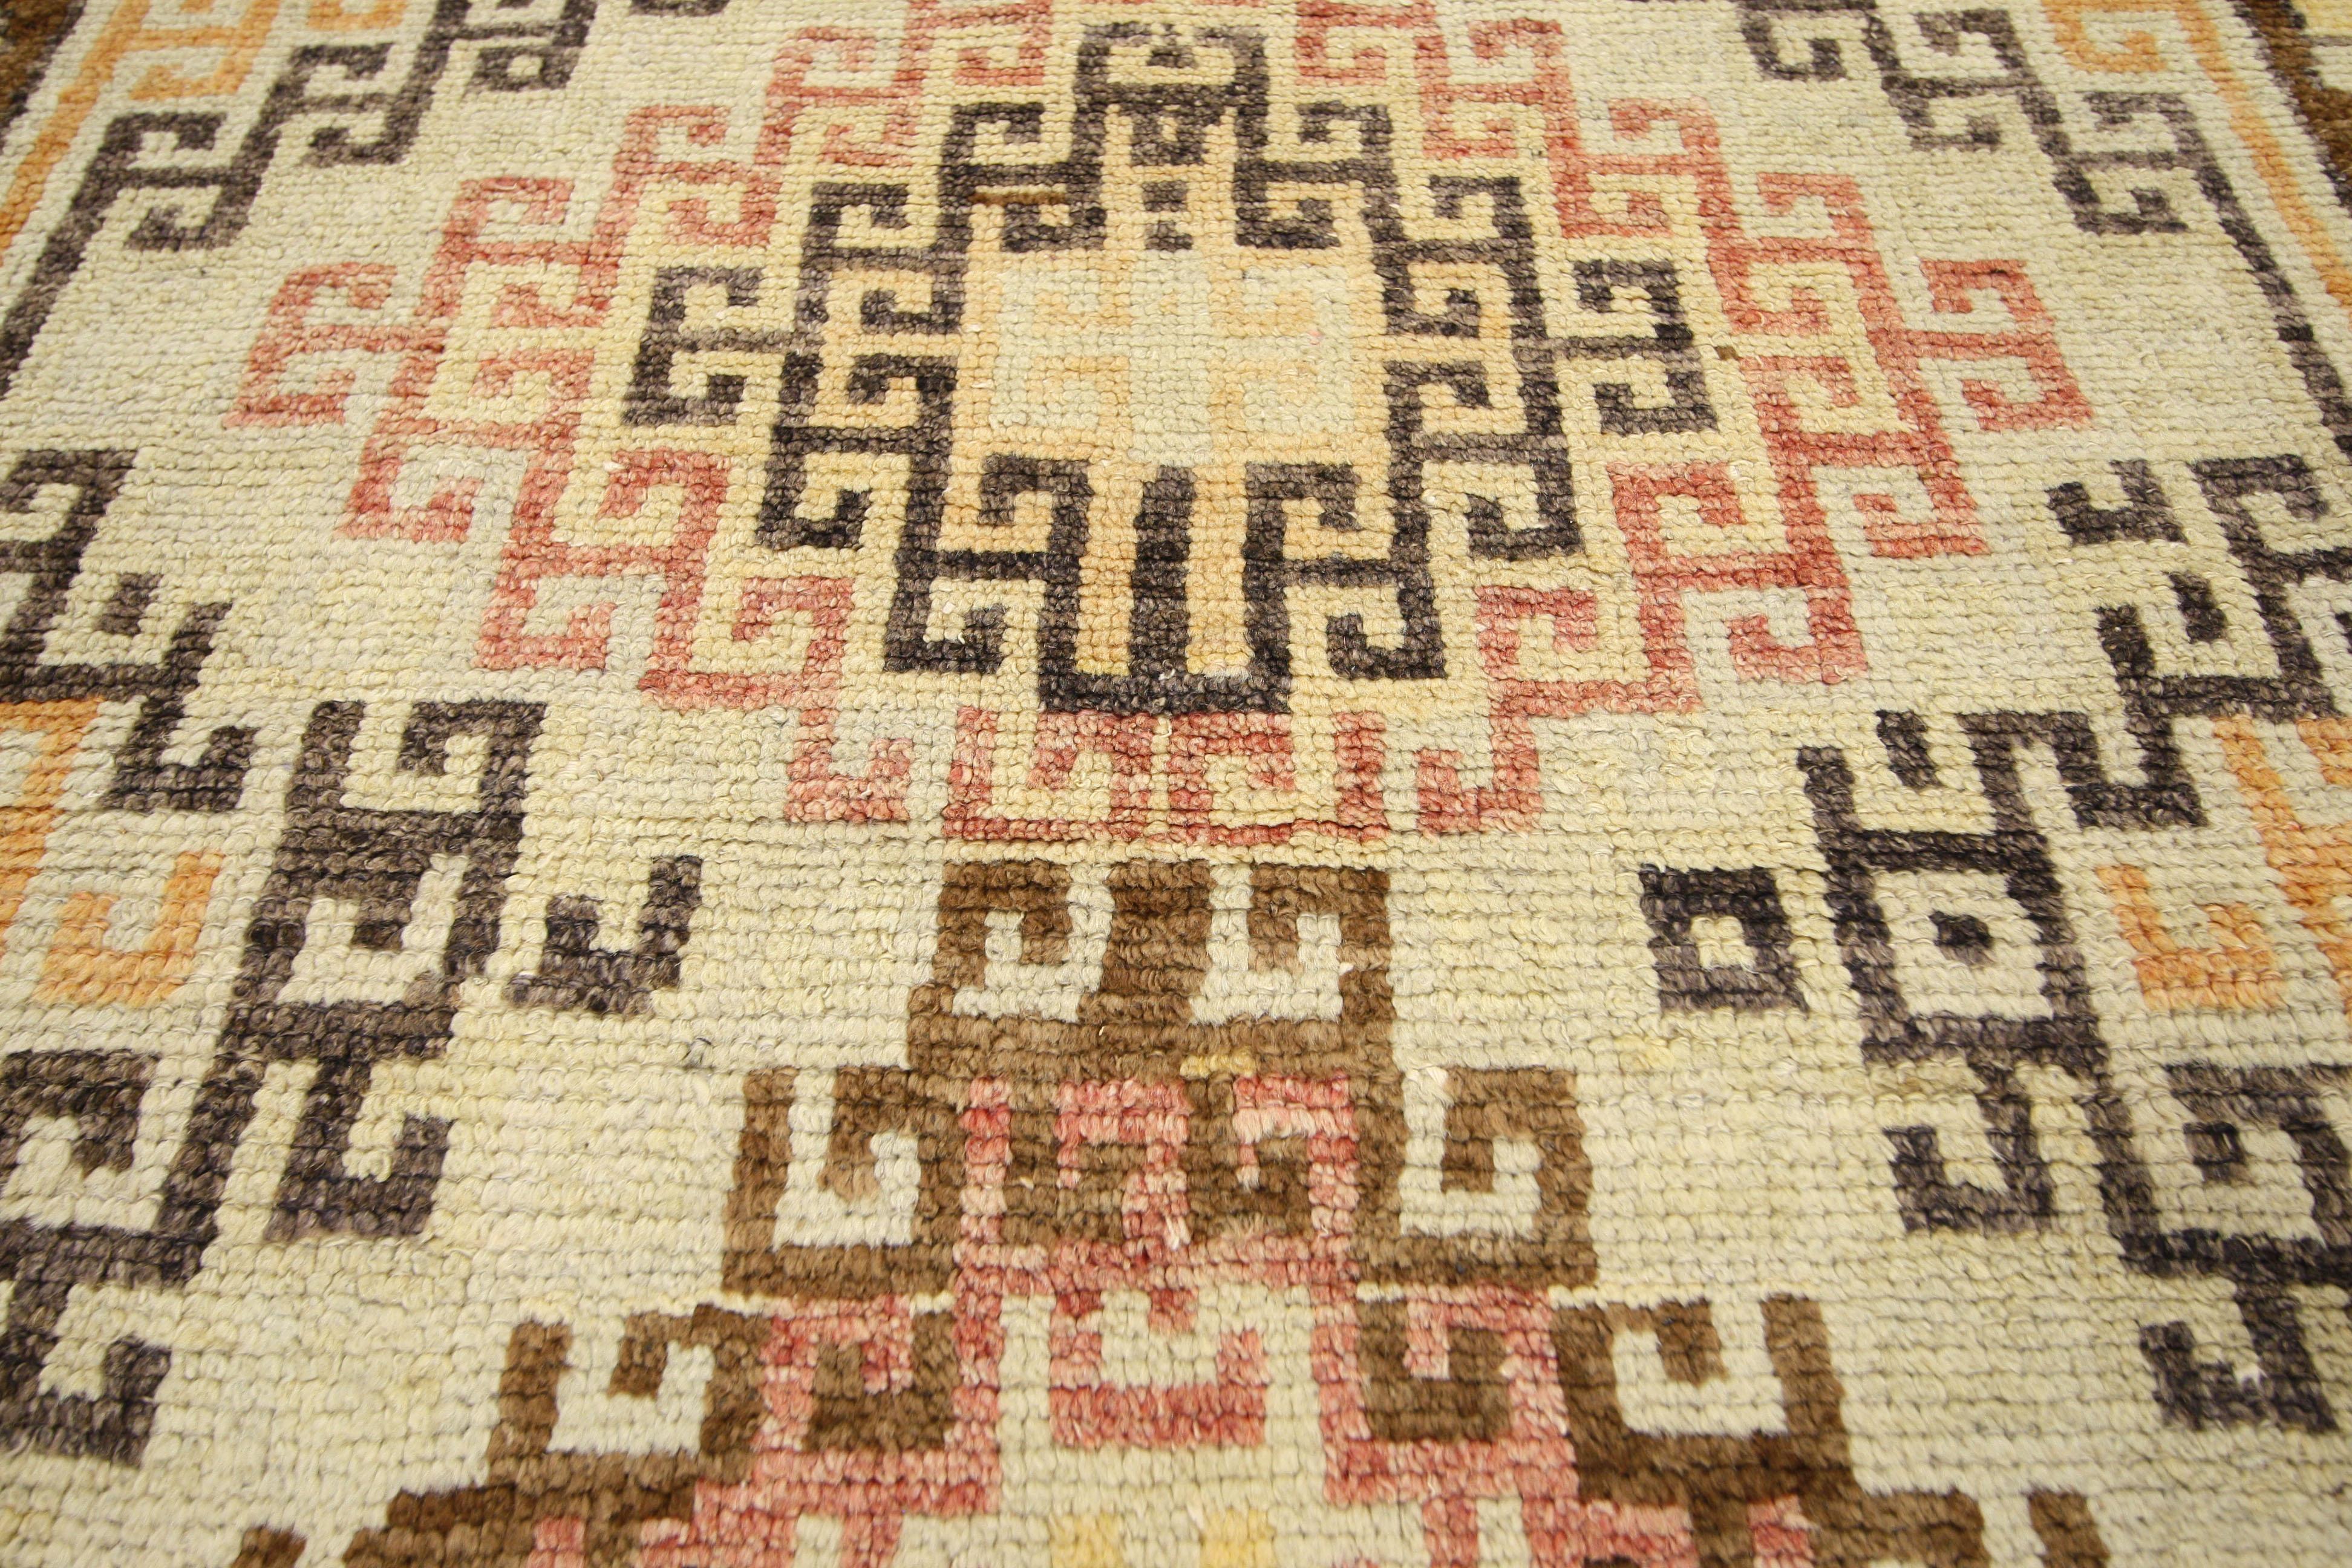 50288, vintage Turkish Oushak runner, wide hallway runner. Dazzling like a tilt a whirl of flower petals, this hand knotted wool vintage Turkish Oushak runner features a playful, colorful display. A row of linear, multi-color hooked diamonds creates